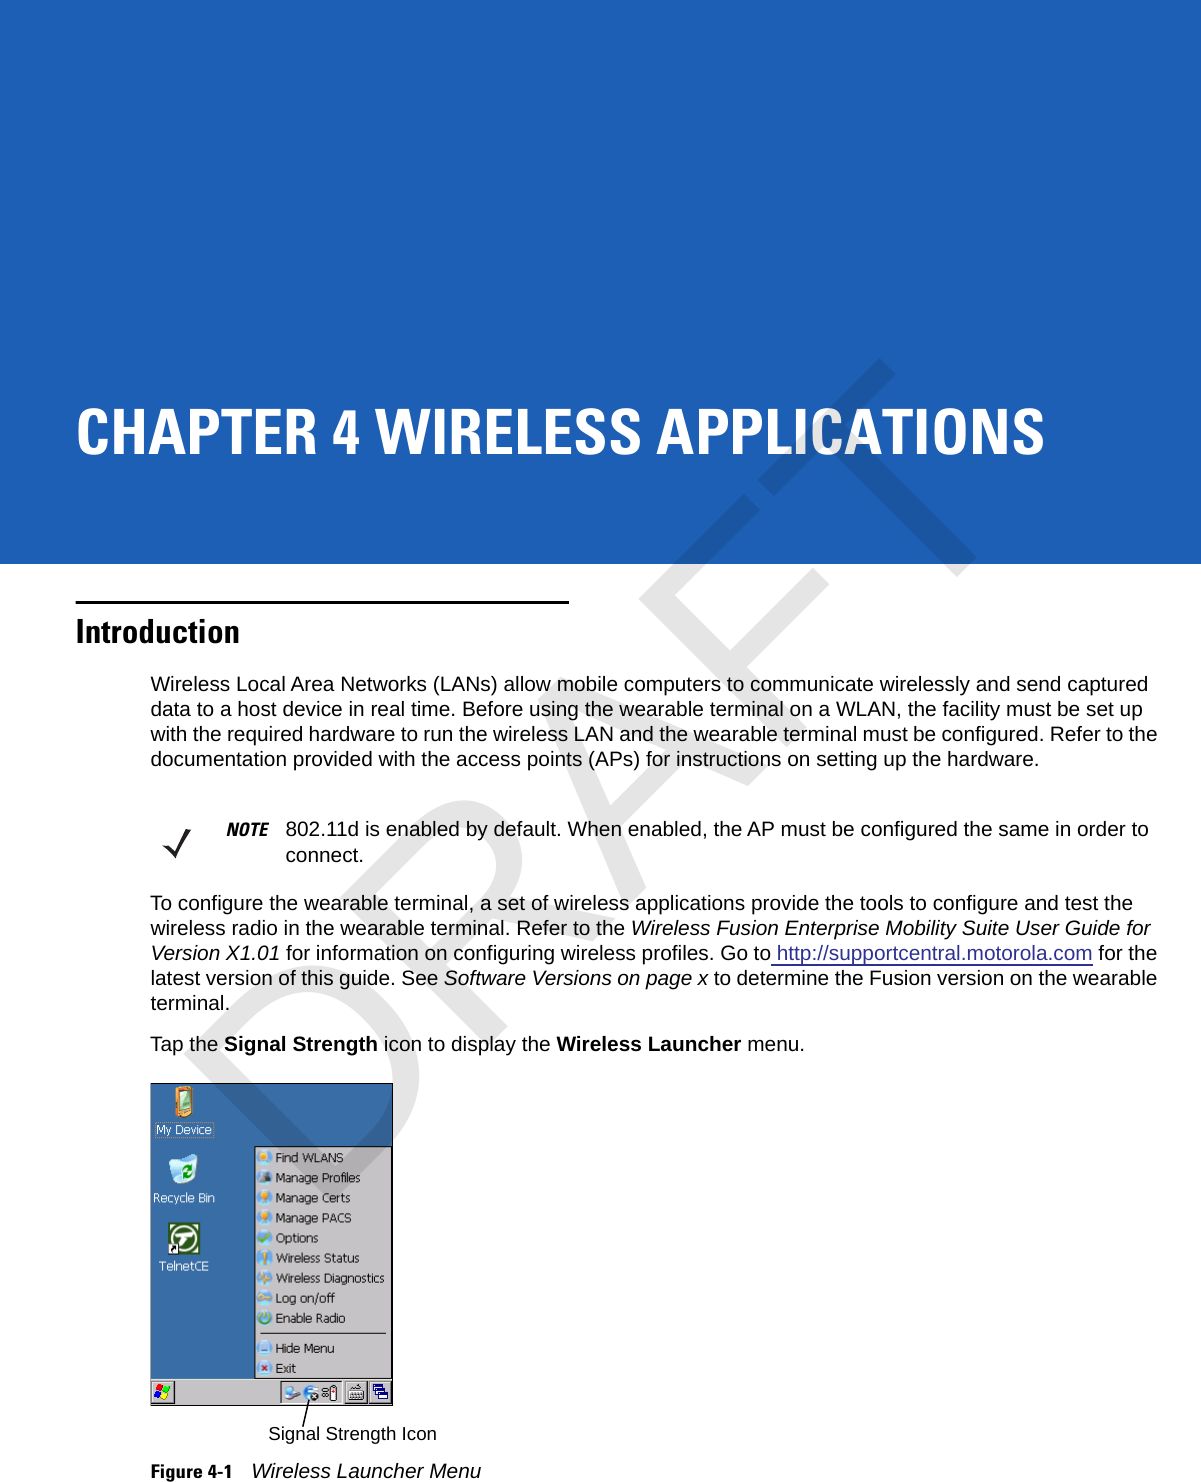 CHAPTER 4 WIRELESS APPLICATIONSIntroductionWireless Local Area Networks (LANs) allow mobile computers to communicate wirelessly and send captured data to a host device in real time. Before using the wearable terminal on a WLAN, the facility must be set up with the required hardware to run the wireless LAN and the wearable terminal must be configured. Refer to the documentation provided with the access points (APs) for instructions on setting up the hardware.To configure the wearable terminal, a set of wireless applications provide the tools to configure and test the wireless radio in the wearable terminal. Refer to the Wireless Fusion Enterprise Mobility Suite User Guide for Version X1.01 for information on configuring wireless profiles. Go to http://supportcentral.motorola.com for the latest version of this guide. See Software Versions on page x to determine the Fusion version on the wearable terminal.Tap the Signal Strength icon to display the Wireless Launcher menu.Figure 4-1Wireless Launcher MenuNOTE 802.11d is enabled by default. When enabled, the AP must be configured the same in order to connect.Signal Strength IconDRAFT